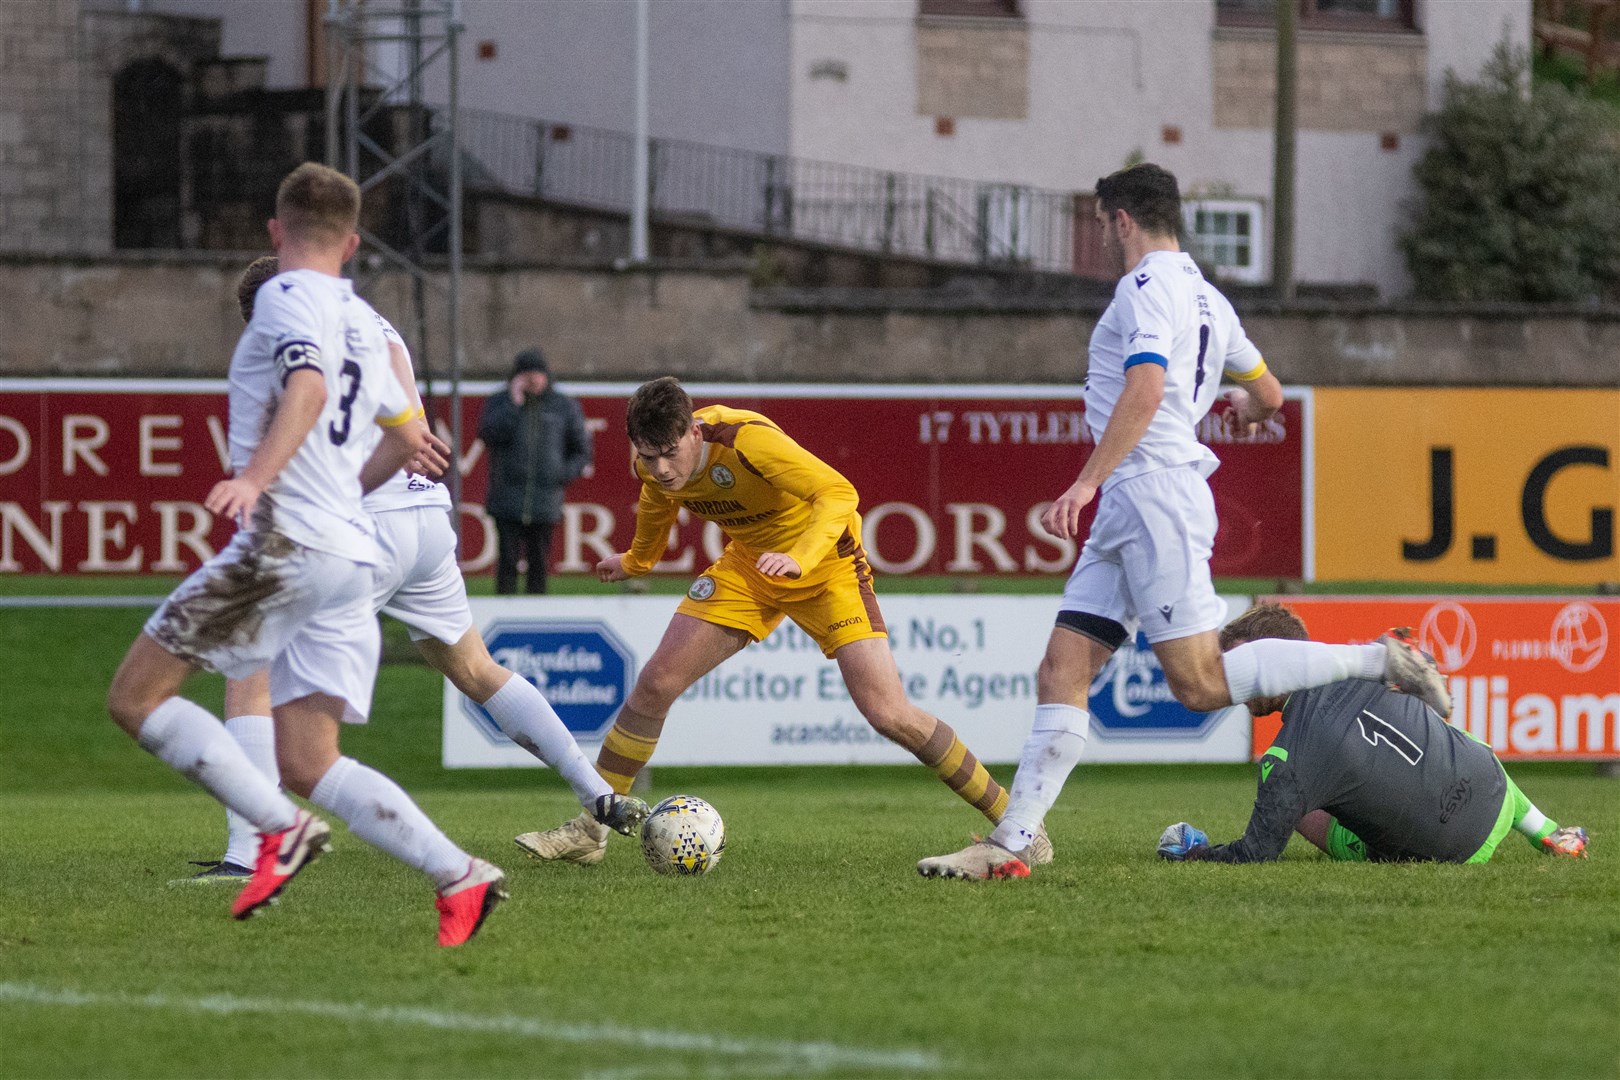 Forres' Ben Barron is unable to get his shot away as he is surrounded by Locos defenders in the first half. ..Forres Mechanics FC (1) vs Inverurie Loco Works FC (1) - Highland Football League 22/23 - Mosset Park, Forres 10/12/2022...Picture: Daniel Forsyth..